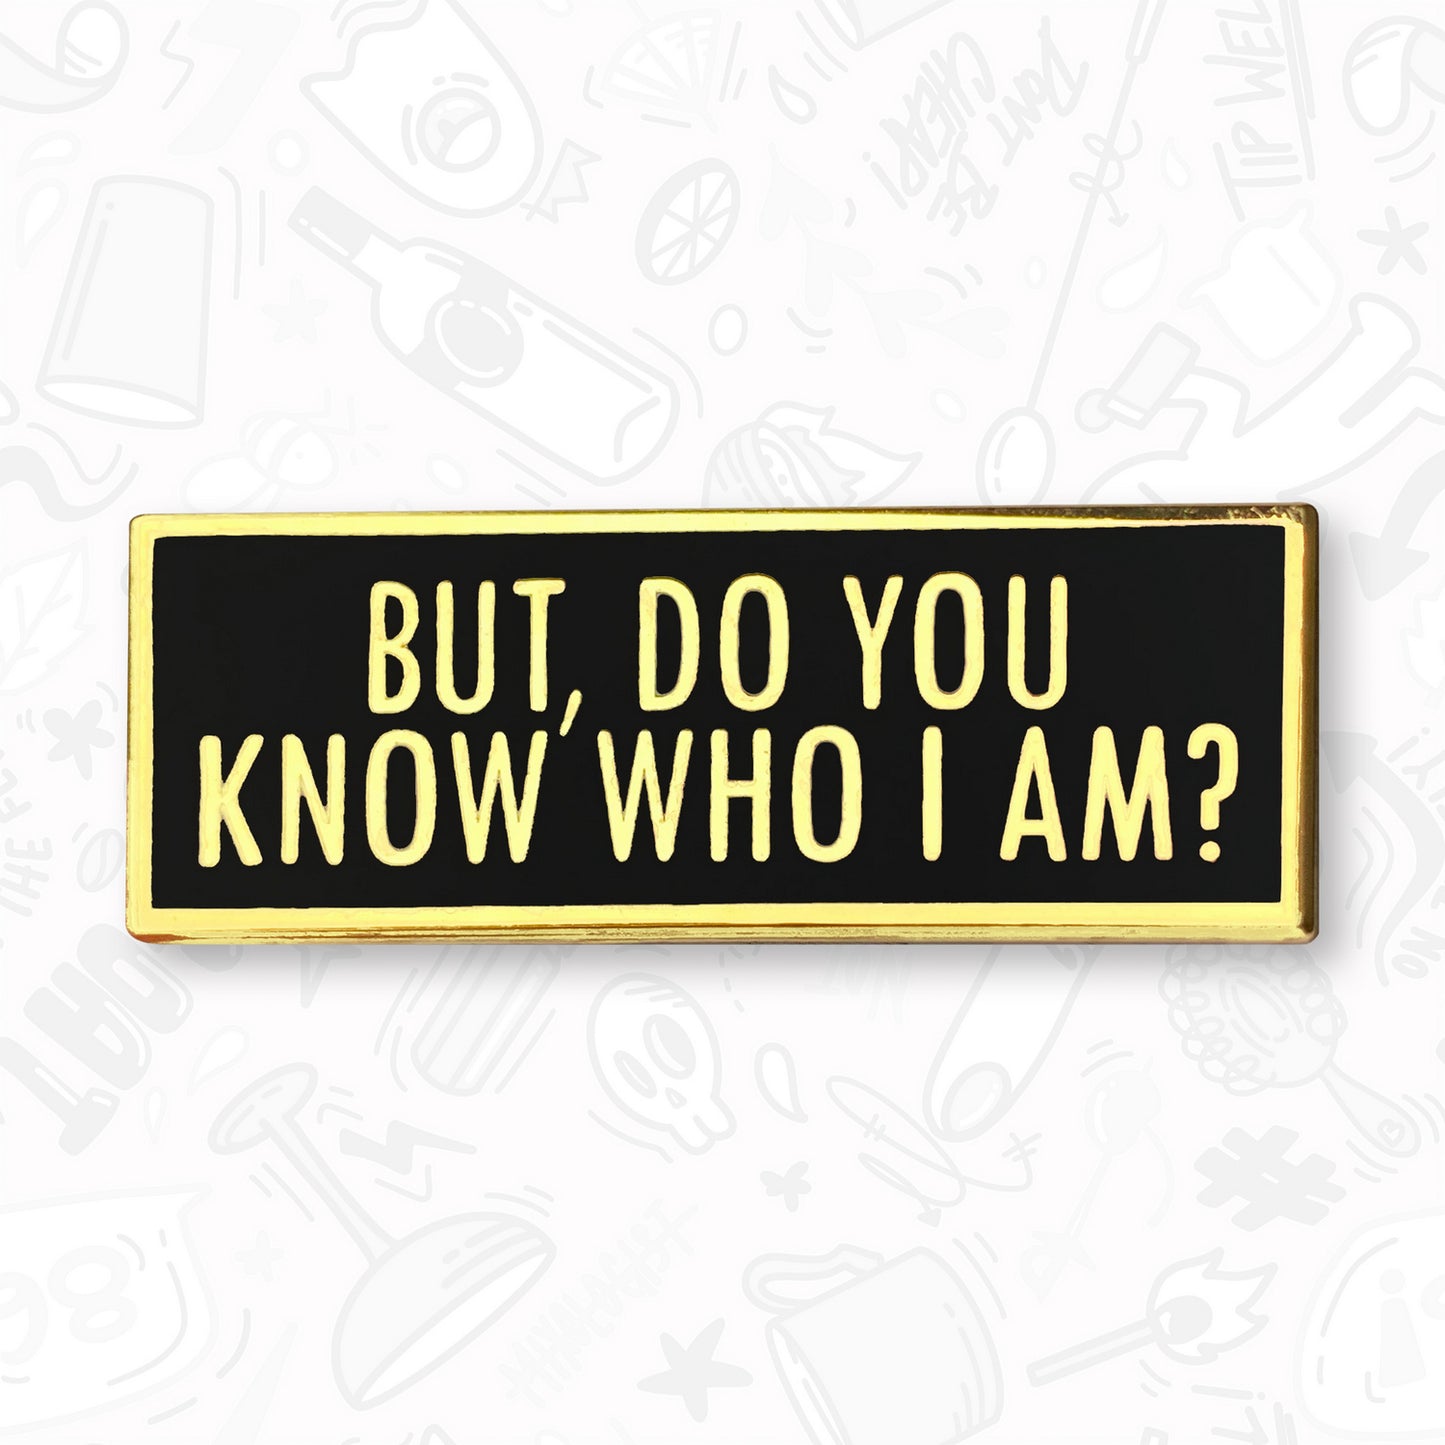 But, Do You Know Who I Am? Bartender Pin by Broken Bartender